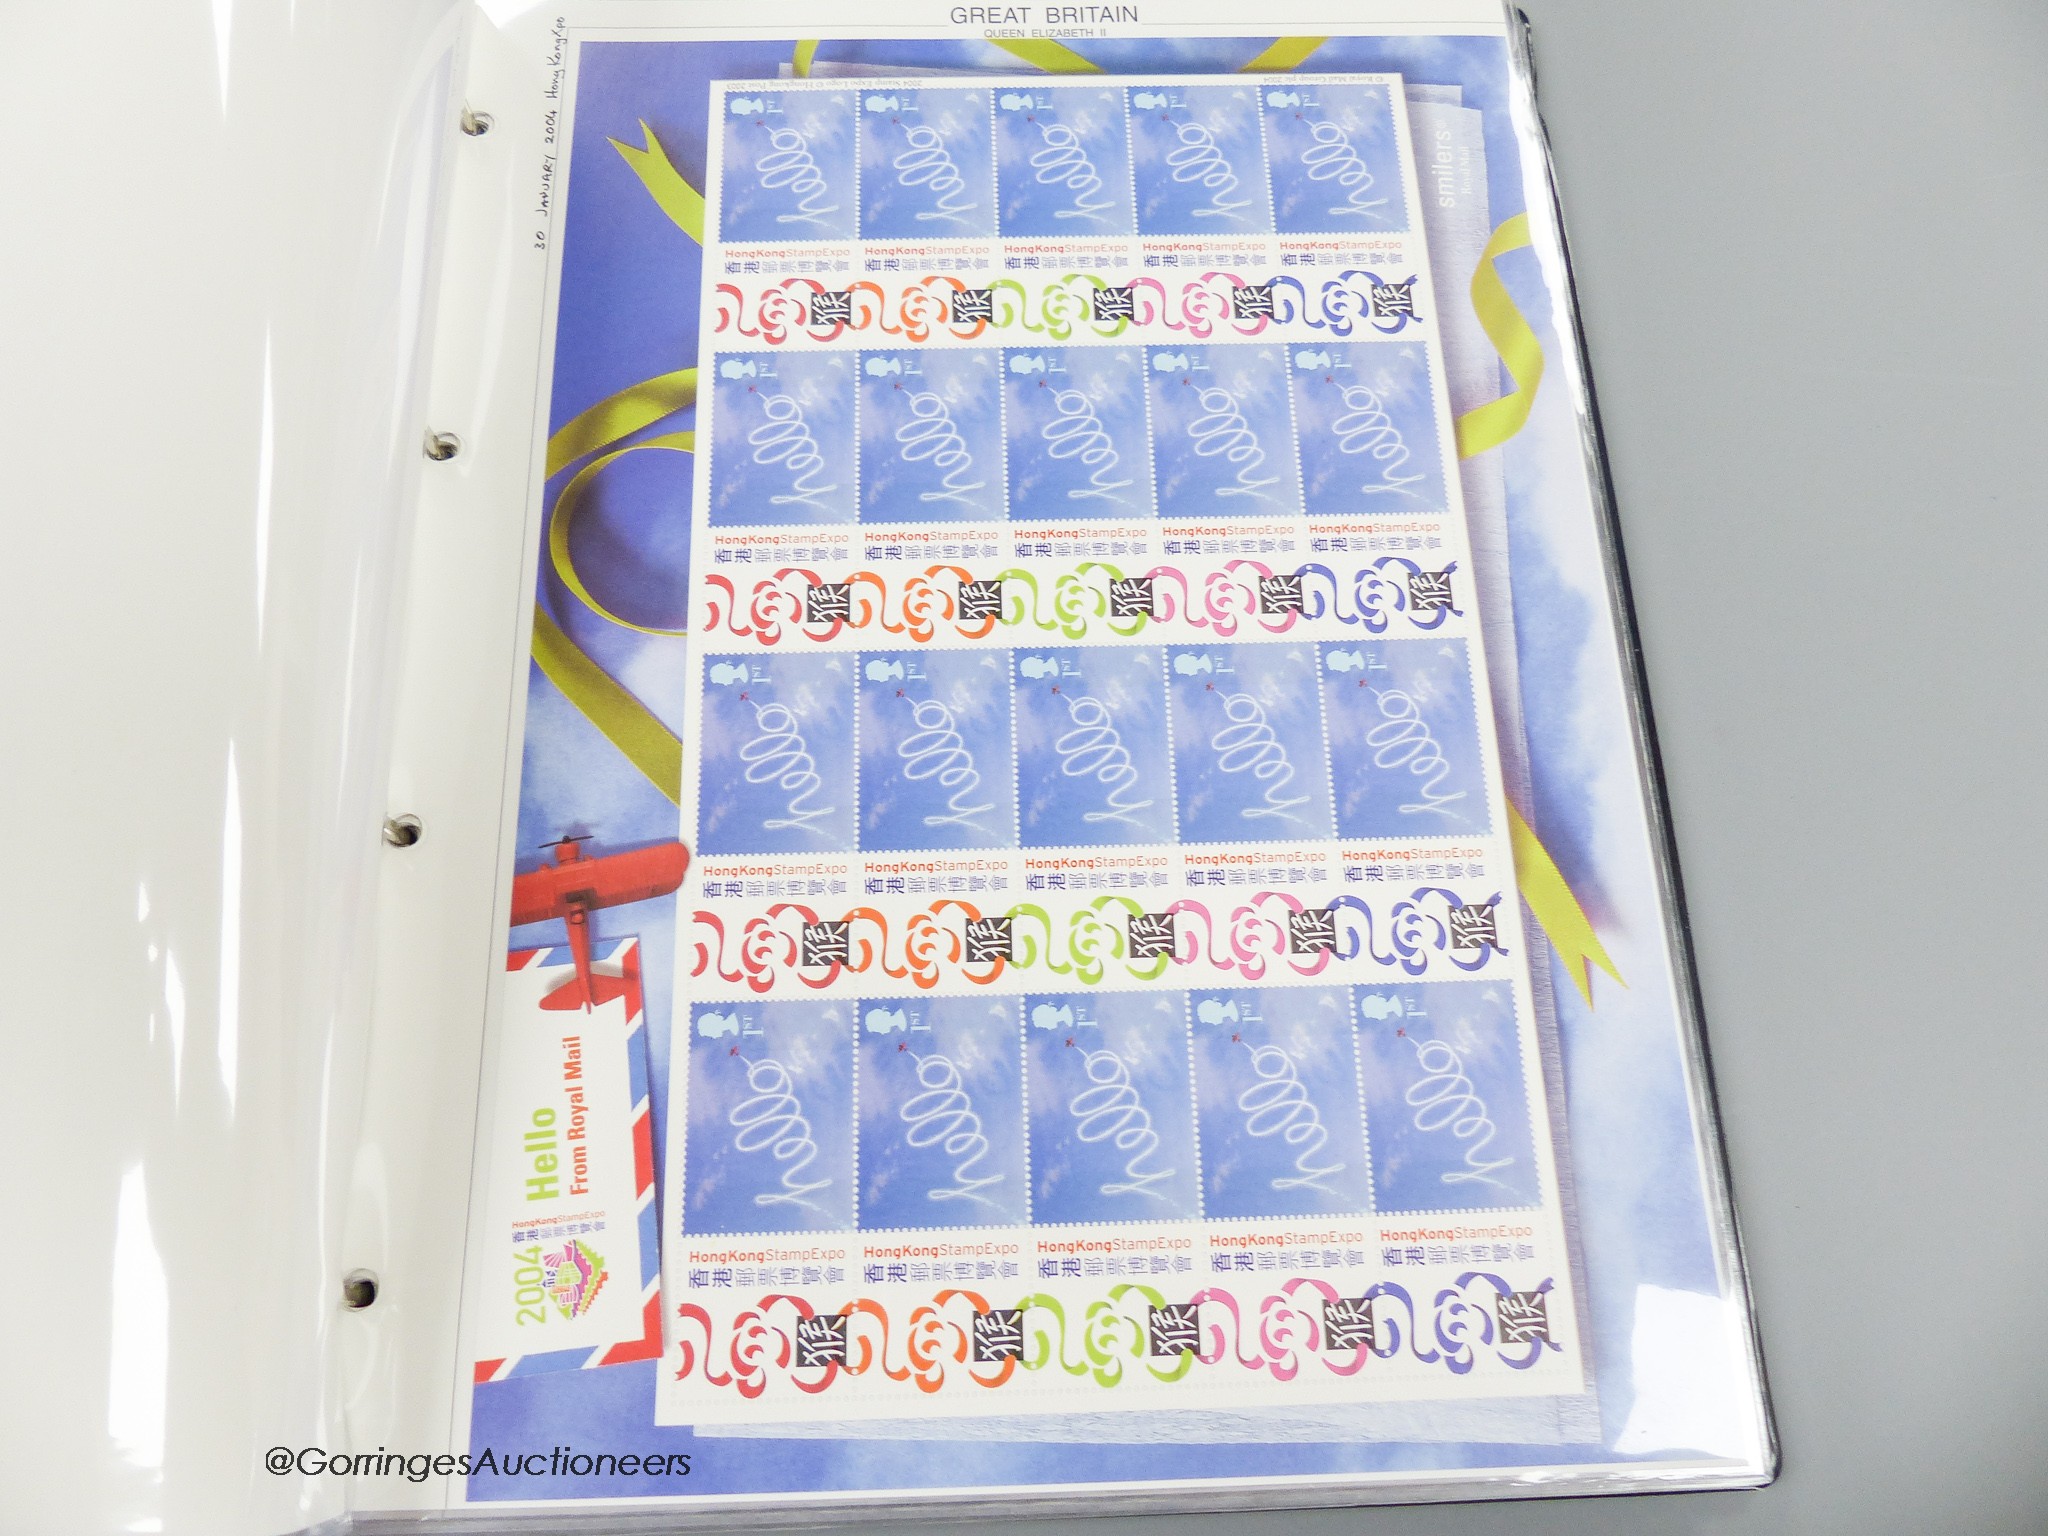 Great Britain stamps album, Smiler sheets from 2000–2005, one album